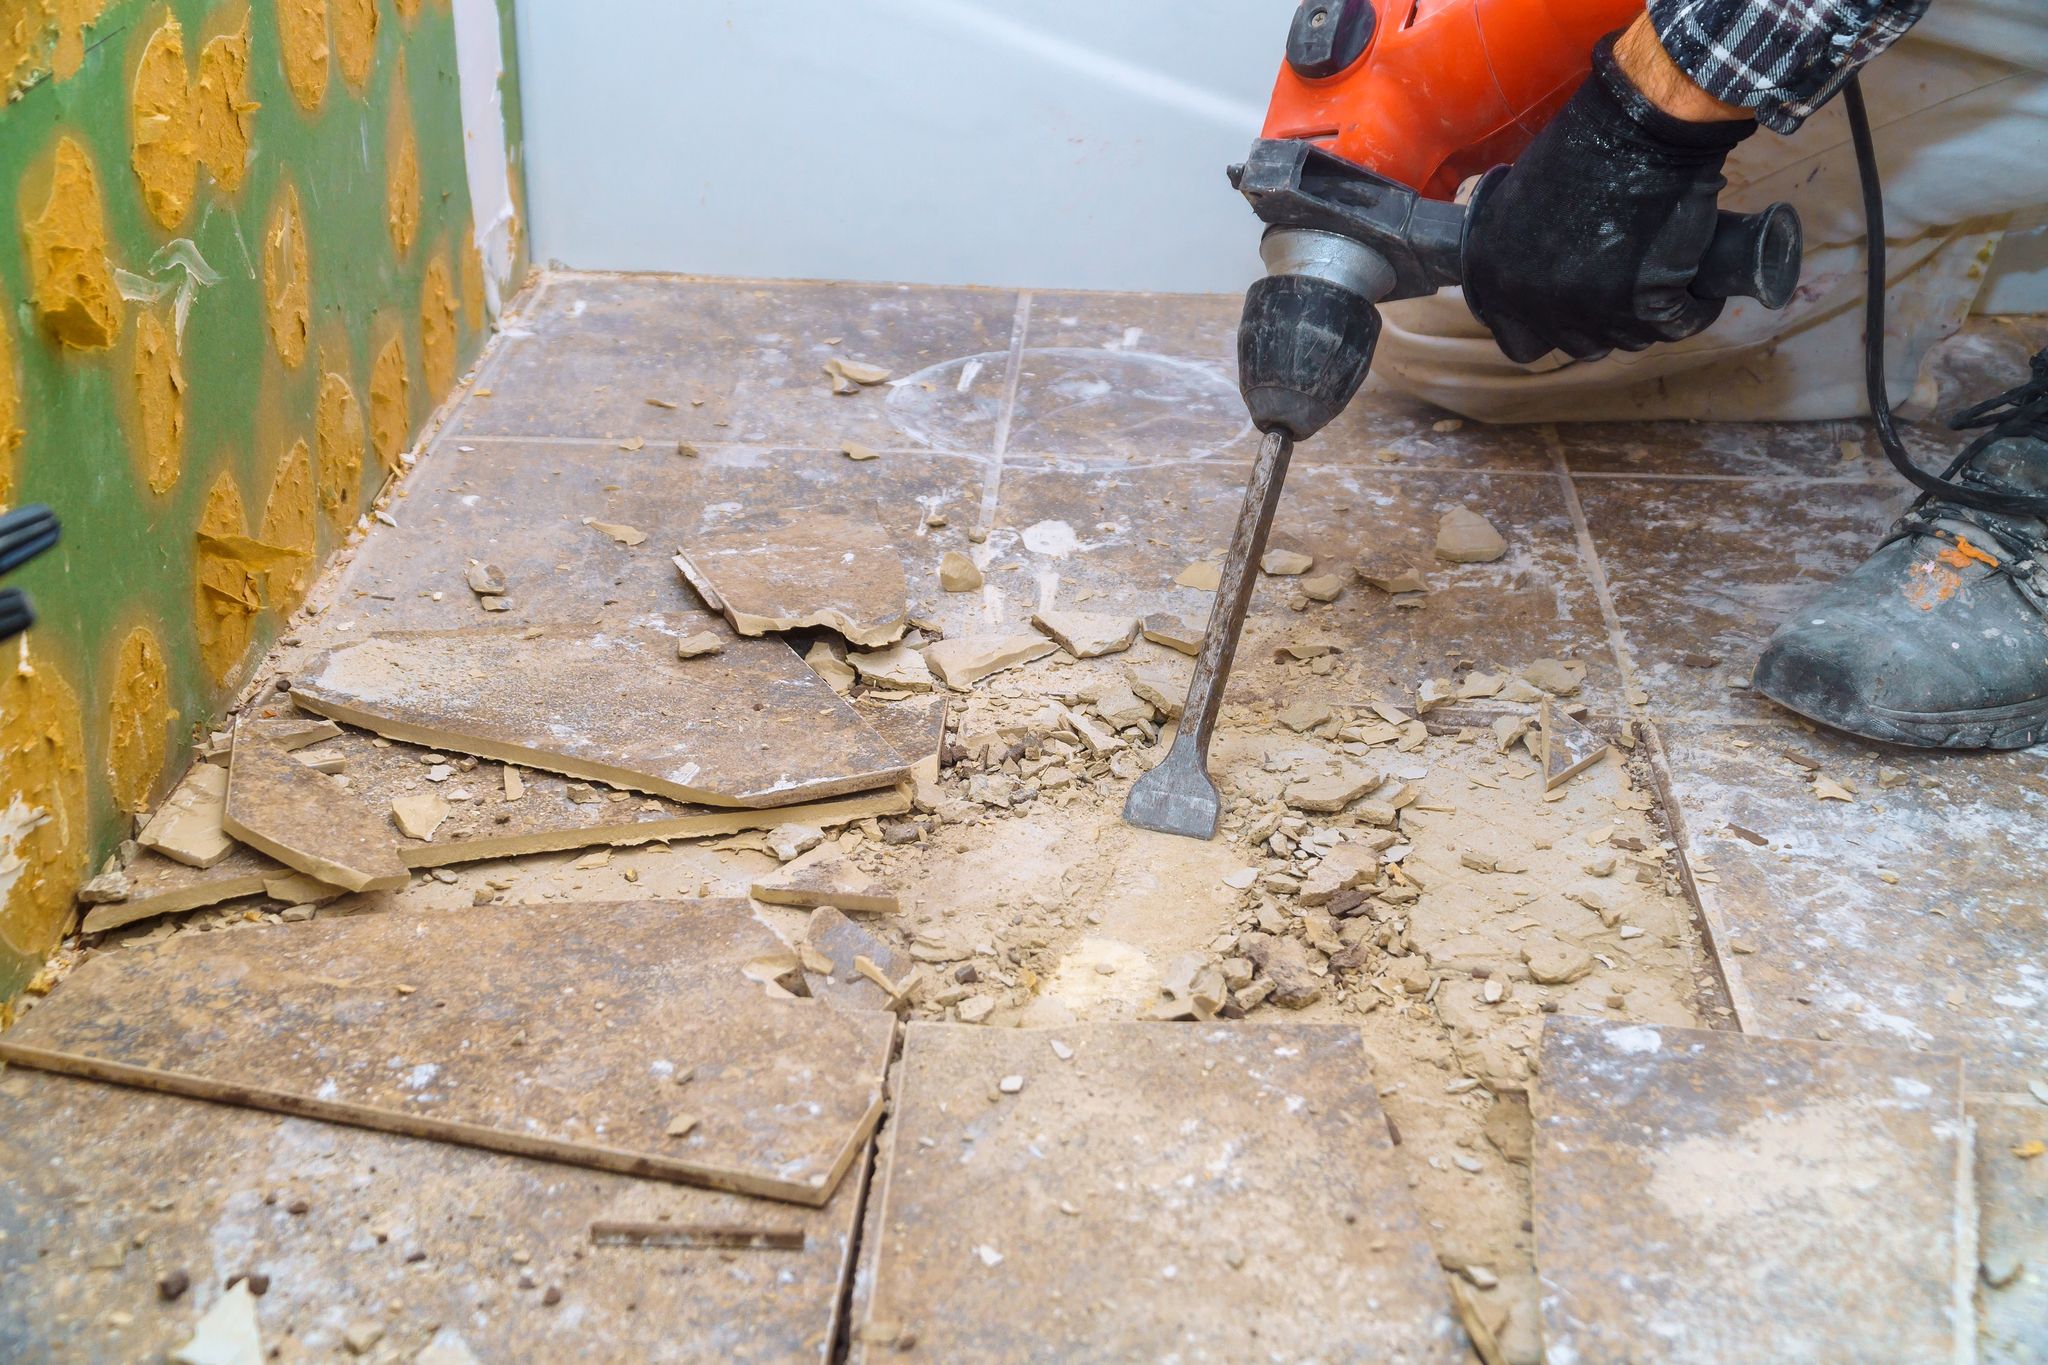 Worker remove, demolish old tiles in a bathroom with jackhammer